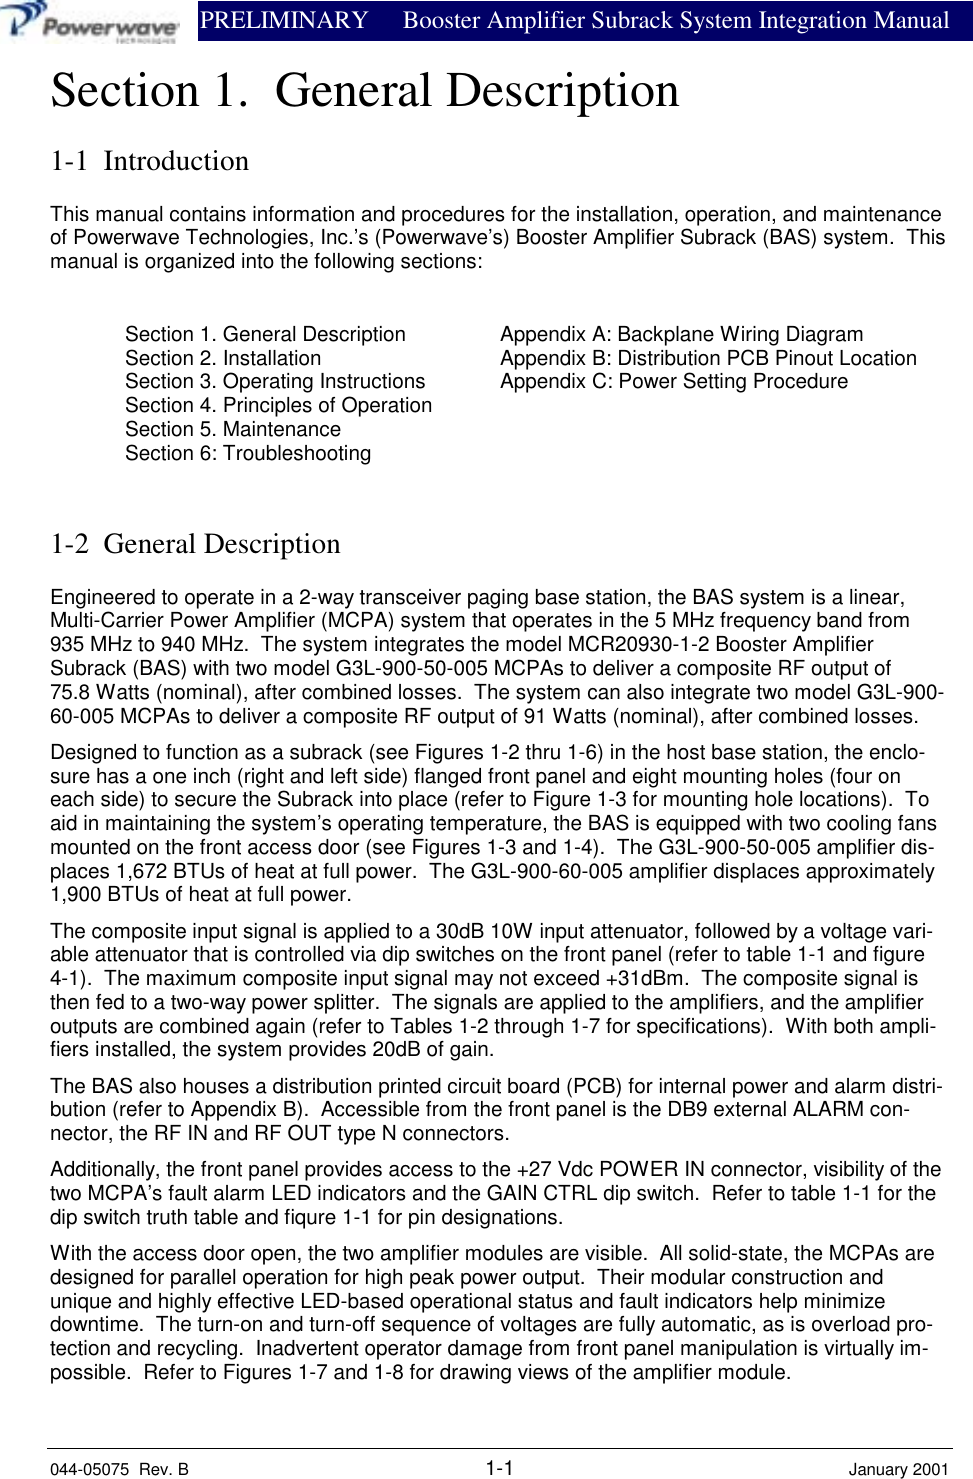                PRELIMINARY Booster Amplifier Subrack System Integration Manual044-05075  Rev. B 1-1 January 2001Section 1.  General Description1-1  IntroductionThis manual contains information and procedures for the installation, operation, and maintenanceof Powerwave Technologies, Inc.’s (Powerwave’s) Booster Amplifier Subrack (BAS) system.  Thismanual is organized into the following sections:Section 1. General Description Appendix A: Backplane Wiring DiagramSection 2. Installation Appendix B: Distribution PCB Pinout LocationSection 3. Operating Instructions Appendix C: Power Setting ProcedureSection 4. Principles of OperationSection 5. MaintenanceSection 6: Troubleshooting1-2  General DescriptionEngineered to operate in a 2-way transceiver paging base station, the BAS system is a linear,Multi-Carrier Power Amplifier (MCPA) system that operates in the 5 MHz frequency band from935 MHz to 940 MHz.  The system integrates the model MCR20930-1-2 Booster AmplifierSubrack (BAS) with two model G3L-900-50-005 MCPAs to deliver a composite RF output of75.8 Watts (nominal), after combined losses.  The system can also integrate two model G3L-900-60-005 MCPAs to deliver a composite RF output of 91 Watts (nominal), after combined losses.Designed to function as a subrack (see Figures 1-2 thru 1-6) in the host base station, the enclo-sure has a one inch (right and left side) flanged front panel and eight mounting holes (four oneach side) to secure the Subrack into place (refer to Figure 1-3 for mounting hole locations).  Toaid in maintaining the system’s operating temperature, the BAS is equipped with two cooling fansmounted on the front access door (see Figures 1-3 and 1-4).  The G3L-900-50-005 amplifier dis-places 1,672 BTUs of heat at full power.  The G3L-900-60-005 amplifier displaces approximately1,900 BTUs of heat at full power.The composite input signal is applied to a 30dB 10W input attenuator, followed by a voltage vari-able attenuator that is controlled via dip switches on the front panel (refer to table 1-1 and figure4-1).  The maximum composite input signal may not exceed +31dBm.  The composite signal isthen fed to a two-way power splitter.  The signals are applied to the amplifiers, and the amplifieroutputs are combined again (refer to Tables 1-2 through 1-7 for specifications).  With both ampli-fiers installed, the system provides 20dB of gain.The BAS also houses a distribution printed circuit board (PCB) for internal power and alarm distri-bution (refer to Appendix B).  Accessible from the front panel is the DB9 external ALARM con-nector, the RF IN and RF OUT type N connectors.Additionally, the front panel provides access to the +27 Vdc POWER IN connector, visibility of thetwo MCPA’s fault alarm LED indicators and the GAIN CTRL dip switch.  Refer to table 1-1 for thedip switch truth table and fiqure 1-1 for pin designations.With the access door open, the two amplifier modules are visible.  All solid-state, the MCPAs aredesigned for parallel operation for high peak power output.  Their modular construction andunique and highly effective LED-based operational status and fault indicators help minimizedowntime.  The turn-on and turn-off sequence of voltages are fully automatic, as is overload pro-tection and recycling.  Inadvertent operator damage from front panel manipulation is virtually im-possible.  Refer to Figures 1-7 and 1-8 for drawing views of the amplifier module.